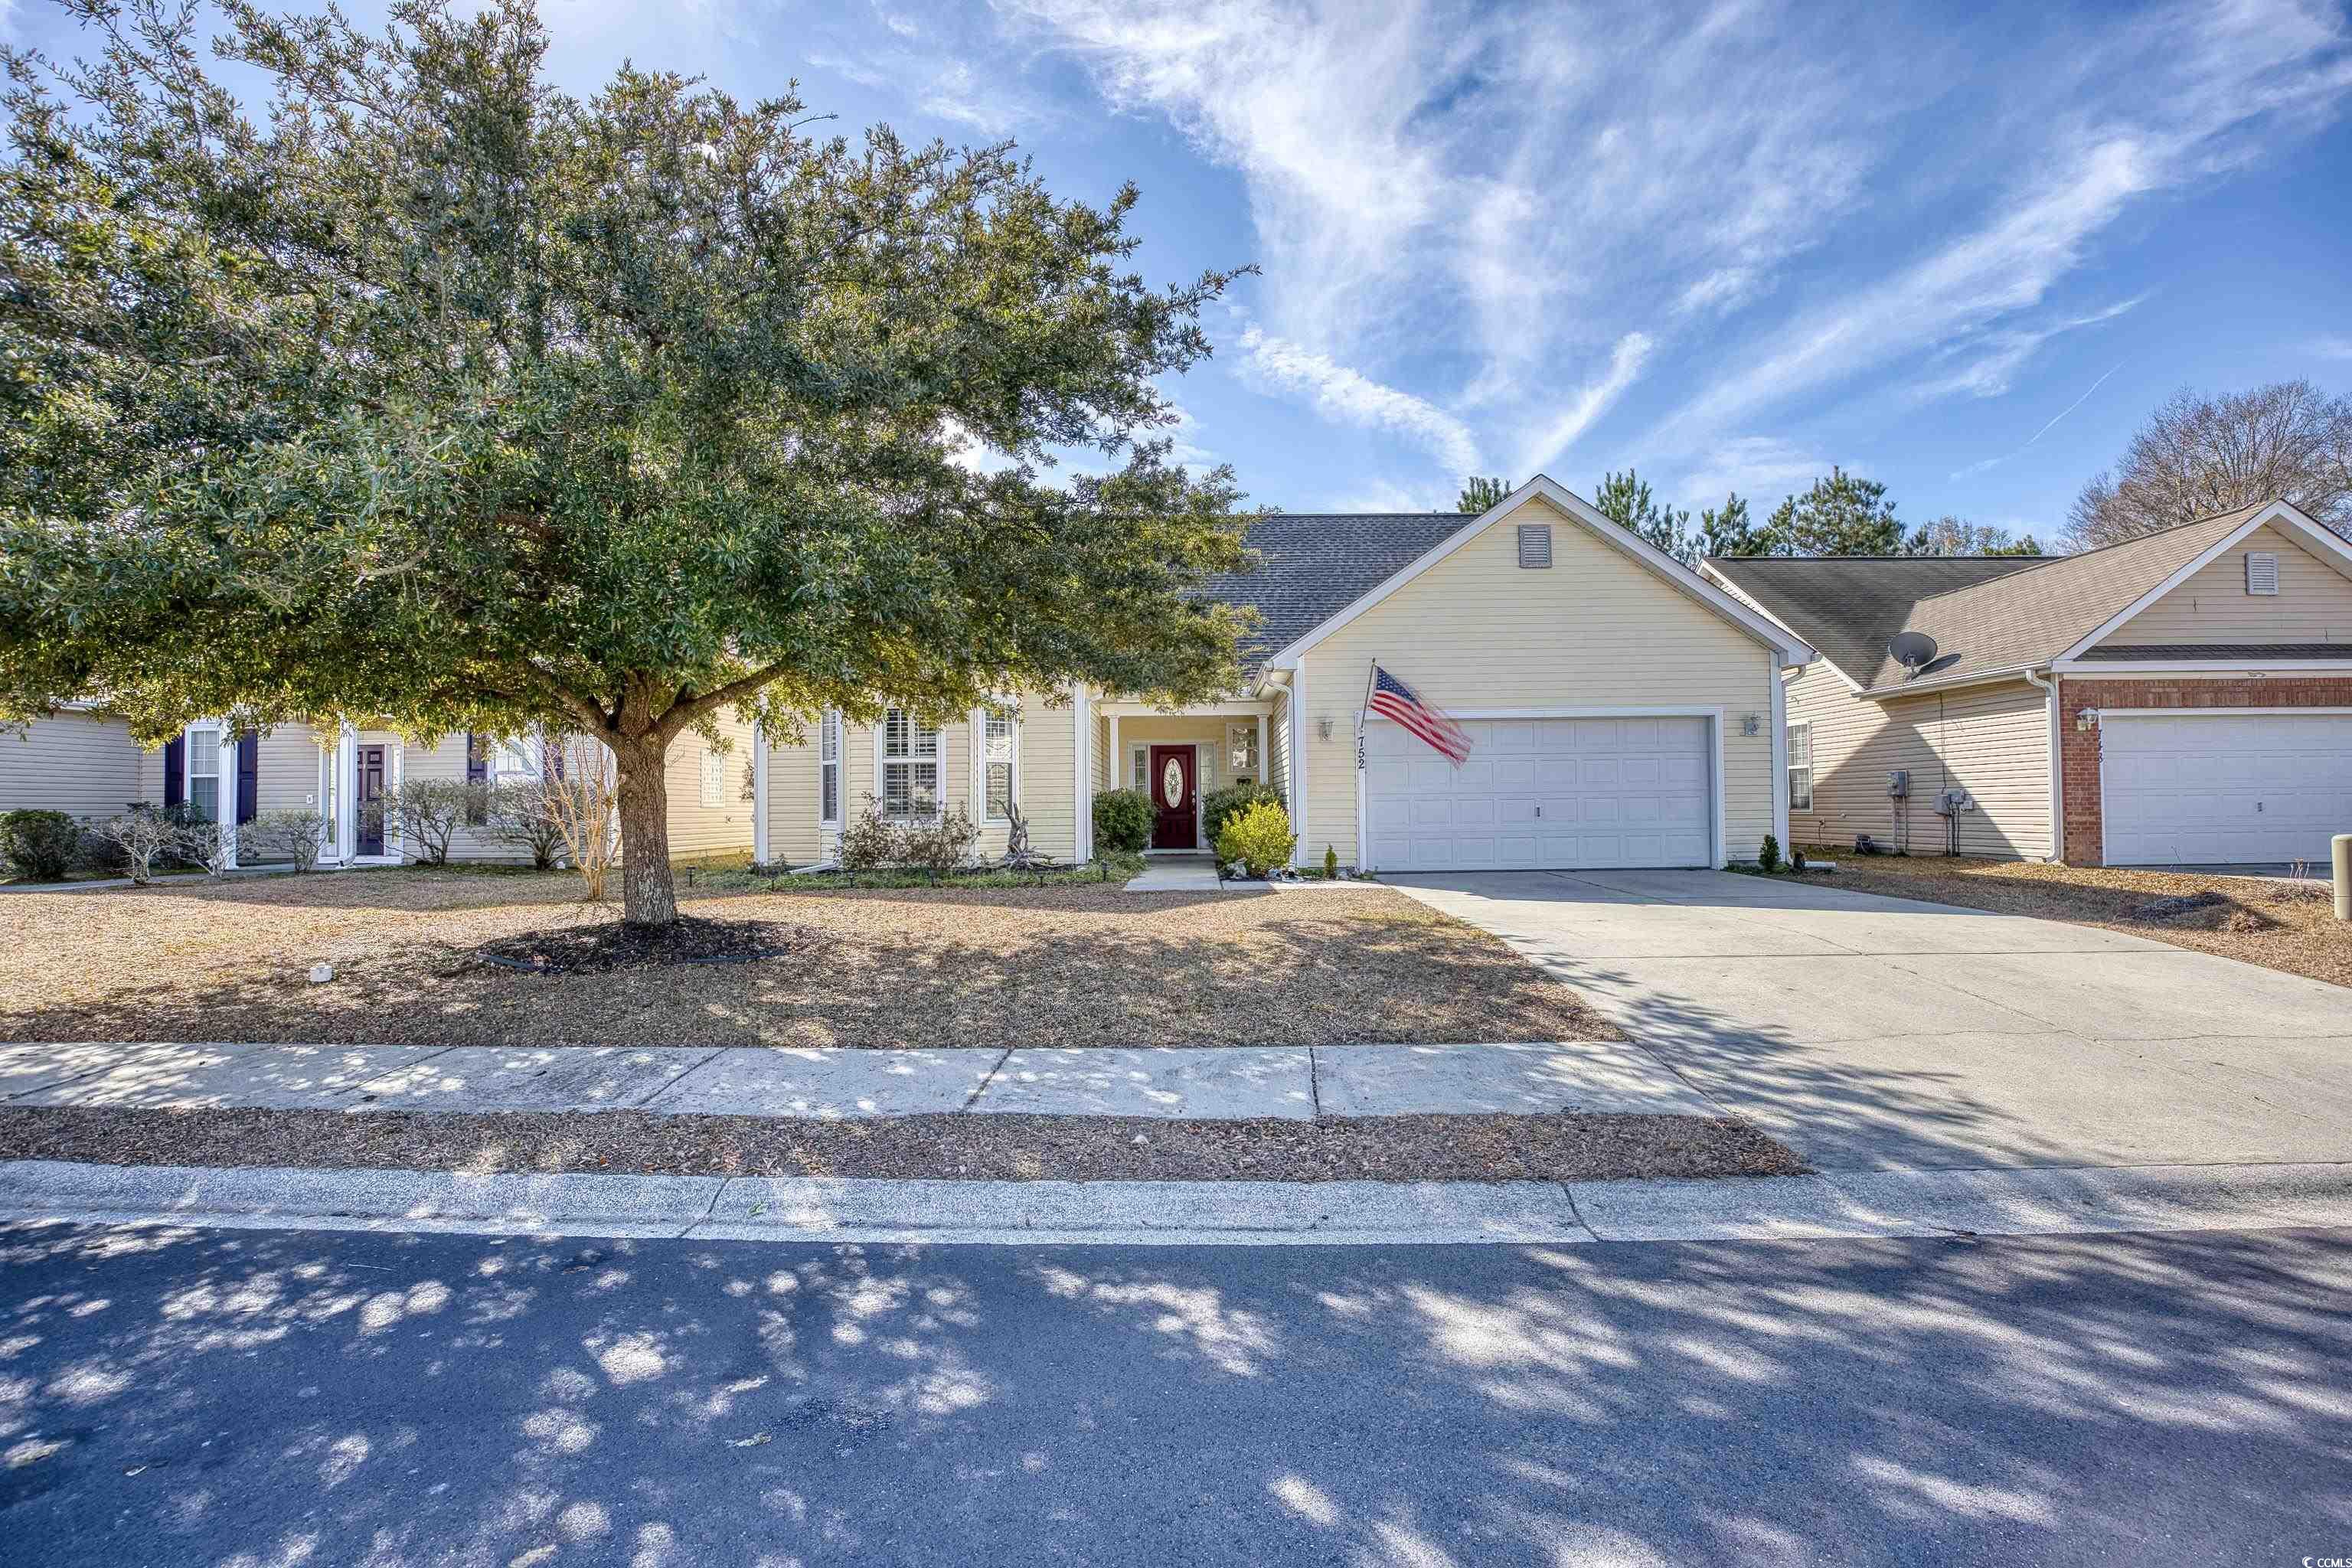 welcome to this very spacious 4 bedroom 3.5 bath home in the wonderful community of brynfield park! this neighborhood is situated between hwy 544 and hwy 707 with access to both making it super easy to get anywhere you like in the grand strand. the tiled kitchen has lots of cabinets and counterspace and is combined with an eat-in-kitchen making this a great gathering spot for entertaining. the laundry room is off of the kitchen in a separate space that will lead you to the 2-car garage. the kitchen also opens up to the very large formal dining area and living area - there is even additional space with a dedicated carolina room! this room leads you to the screened porch and then off to the vinyl privacy fenced in back yard. there is also a gas firepit which will convey with the sale and lighting around the perimeter of the back yard. the spacious primary bedroom has a 58 inch plasma tv that conveys with the sale and plenty of room for even the bulkiest of furnishings. there is a private primary bath off the bedroom with double sinks, garden tub and separate shower. there are an additional two bedrooms toward the front of the house with a jack and jill full bath and also a powder room off the foyer. the 4th bedroom with door can also be used as a bonus room and also has a full bath and spacious closet. great for a private guest room! the roof and hvac system are only a few years old and also most of the appliances in the kitchen are newer. the community has a outdoor pool and playground along with sidewalks and ponds with some great views of the local wildlife. such a great neighborhood located close to shopping, restaurants, hospitals and clinics and of course the beach! square footage is approximate and not guaranteed. buyer is responsible for verification.